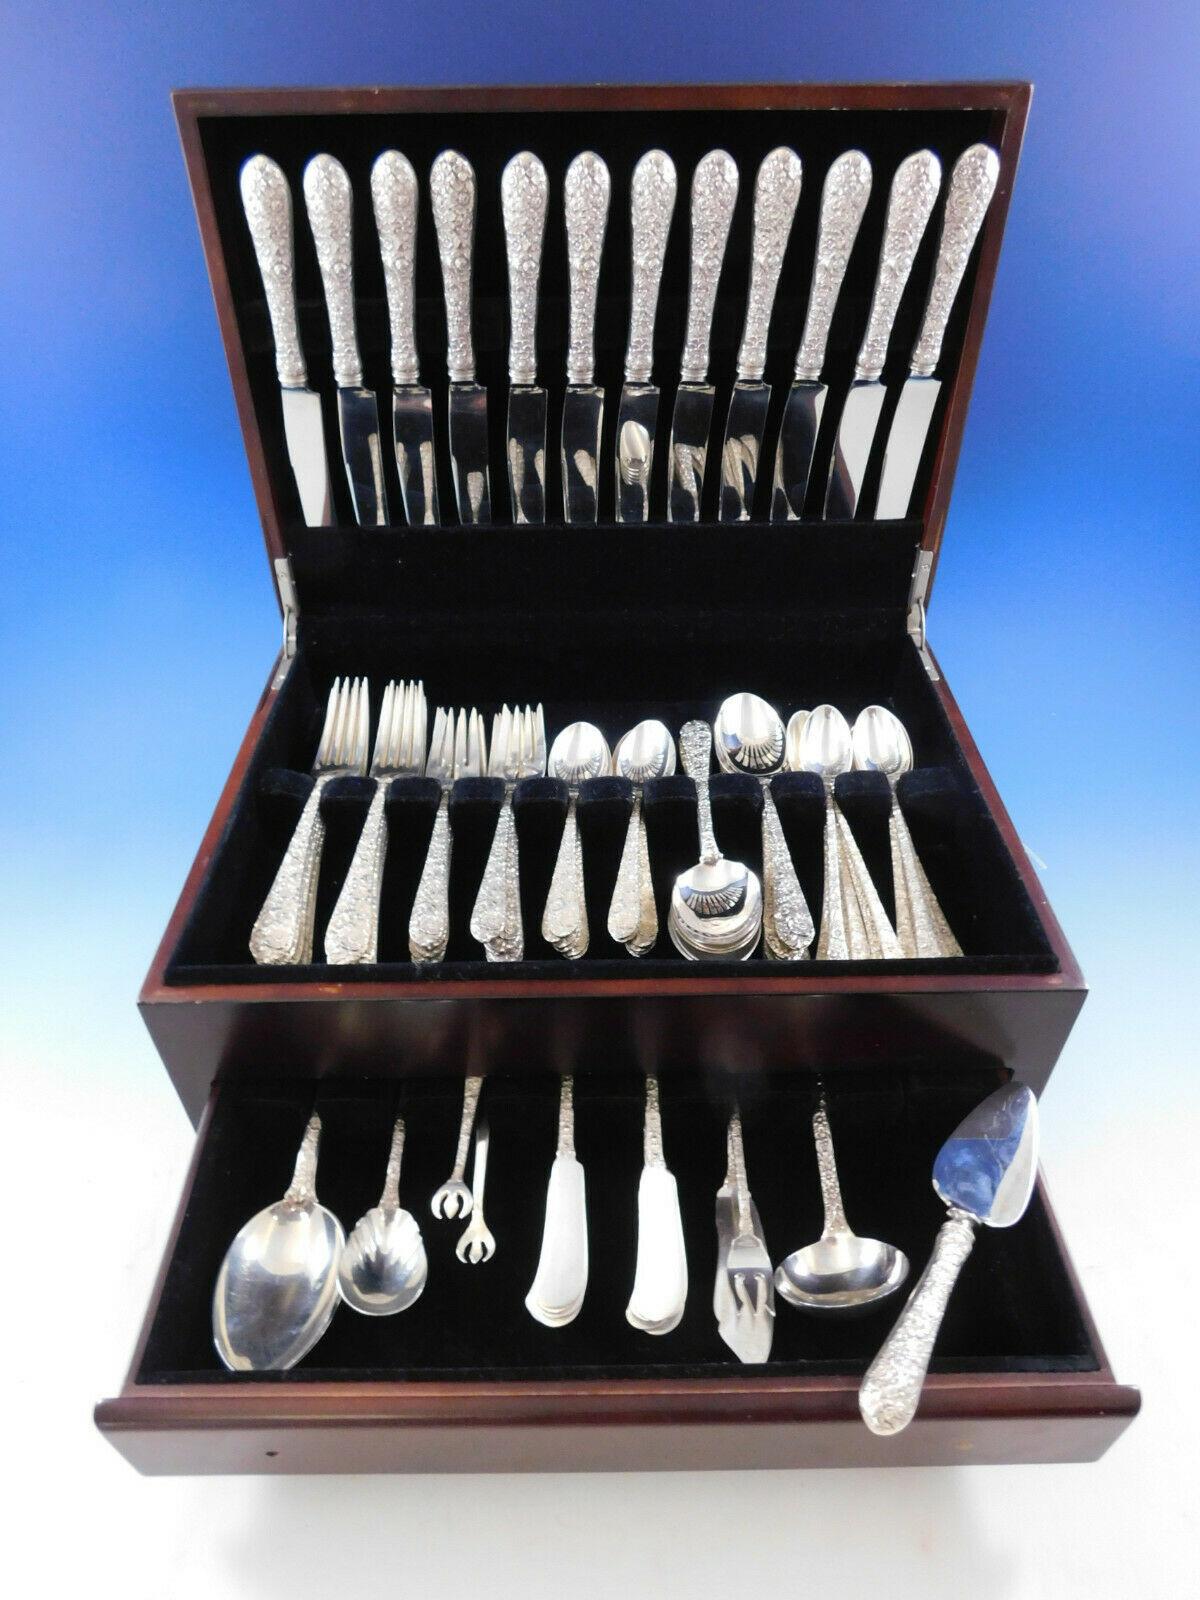 Exceptional dinner size bridal bouquet by Alvin circa 1932 floral repoussed sterling silver flatware set - 92 pieces. This set includes:

12 dinner size knives, 9 1/2